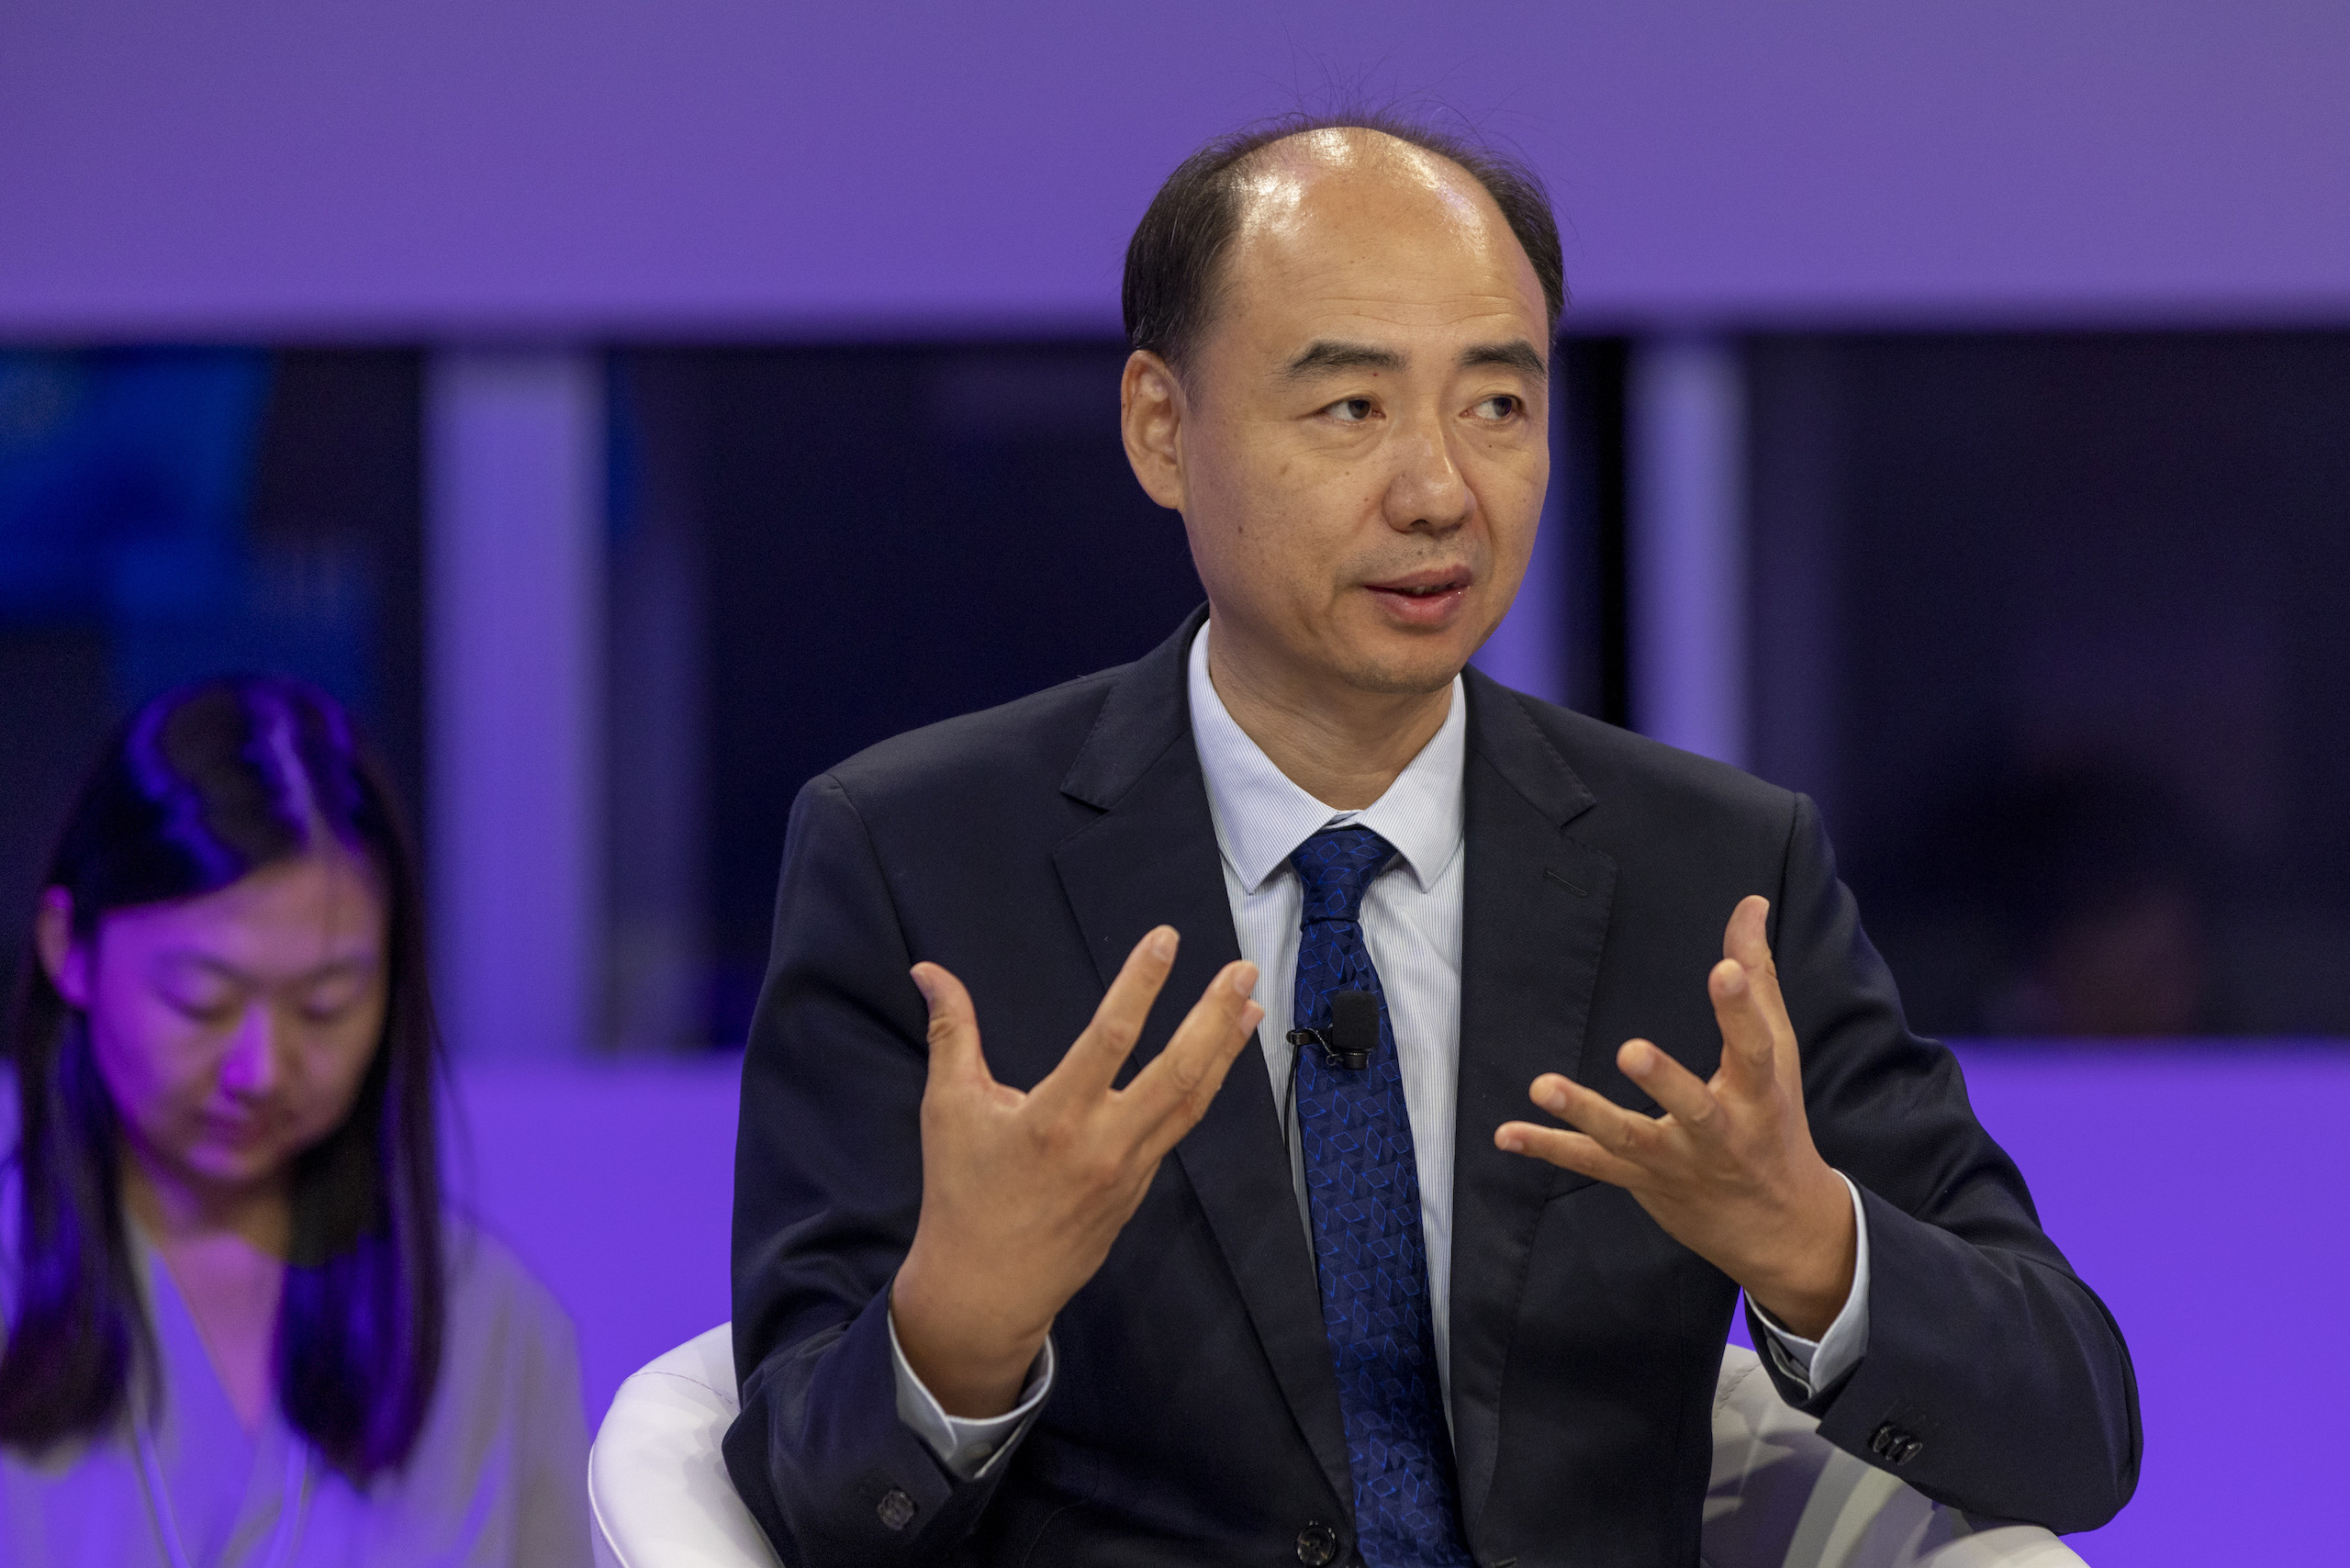 <p>Ma Jun, founder and director of a Beijing-based environmental non profit, speaking in 2023 at a World Economic Forum conference in Tianjin, China (Image: <a href="https://www.flickr.com/photos/15237218@N00/53004214992">Faruk Pinjo</a> / <a href="https://www.flickr.com/people/worldeconomicforum/">World Economic Forum</a>, <a href="https://creativecommons.org/licenses/by-nc-sa/2.0/">CC BY-NC-SA</a>)</p>